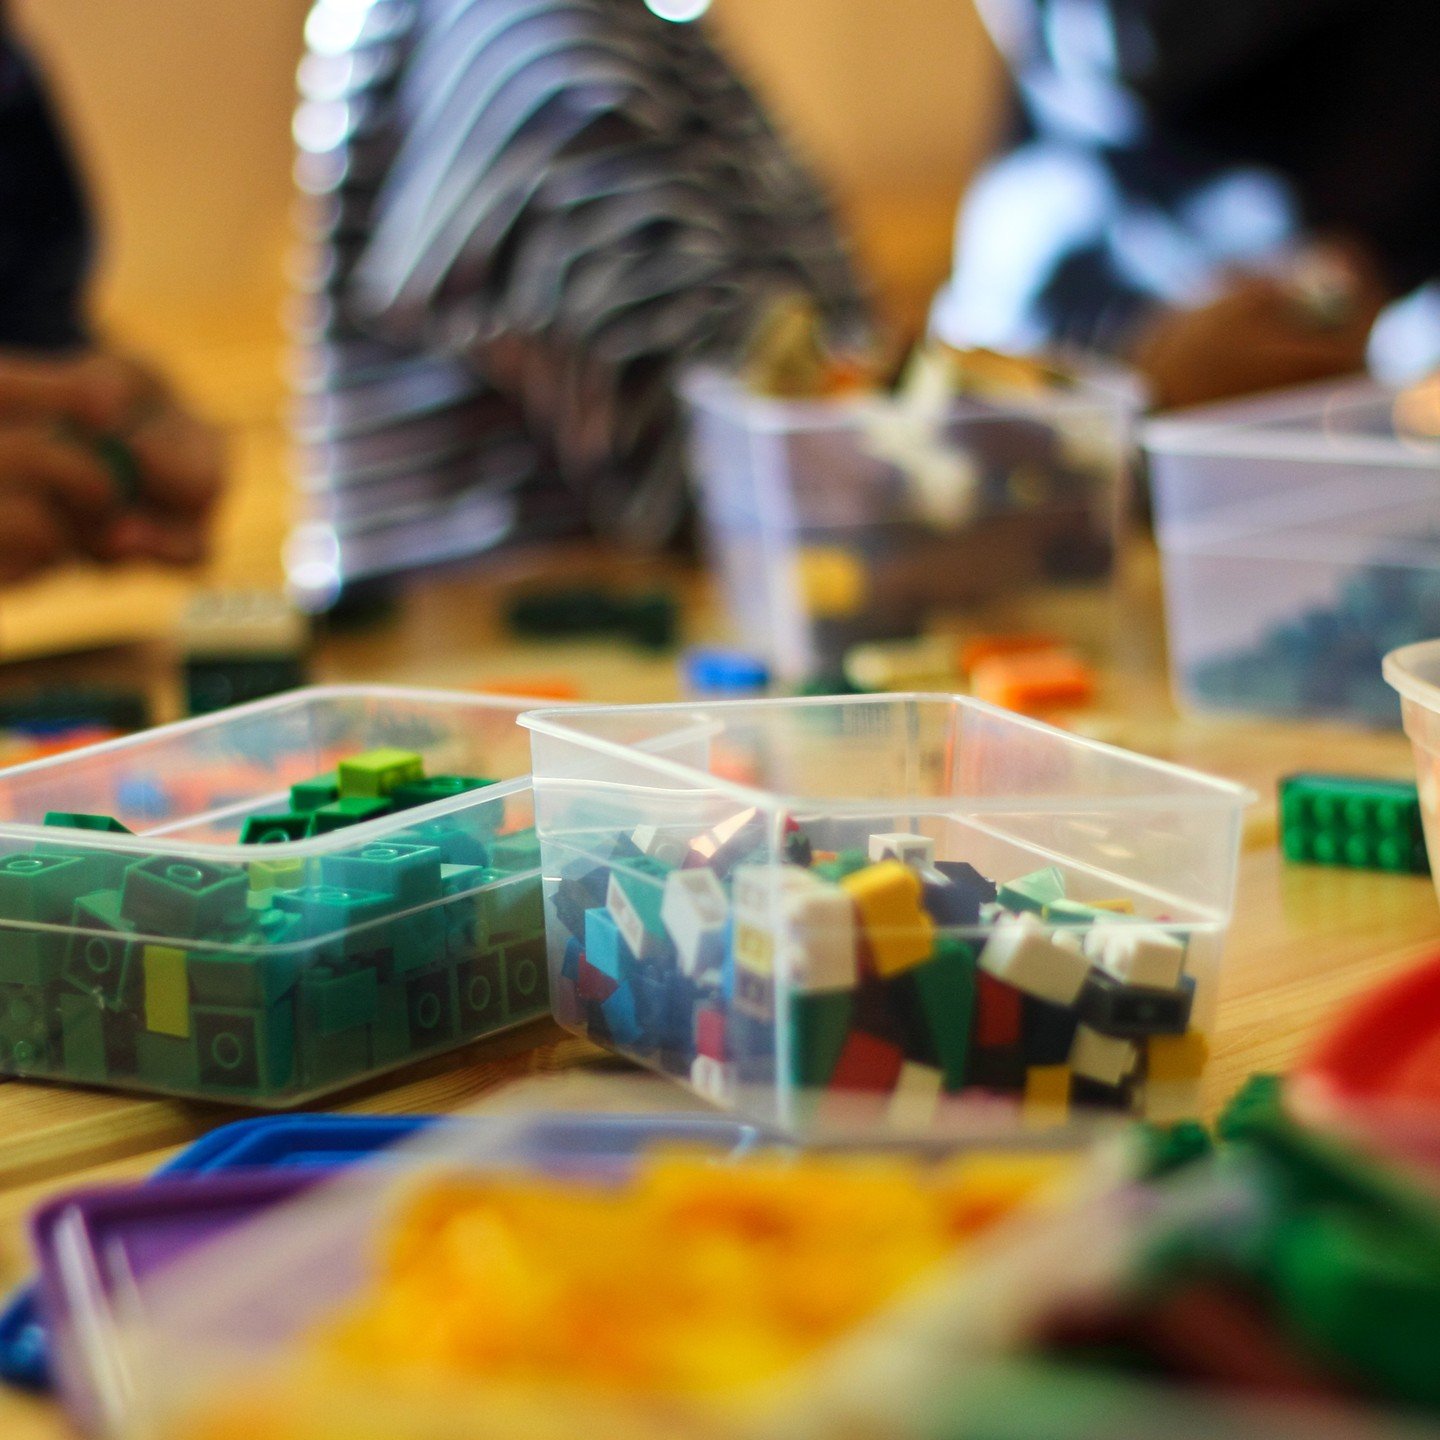 ✨ TOMORROW, March 9th from 9:30 to 11:00am we warmly welcome you and your kiddos into the library to explore the boundless possibilities of LEGO creations and let your imaginations soar. Adults must be present. No registration required.

We can't wai